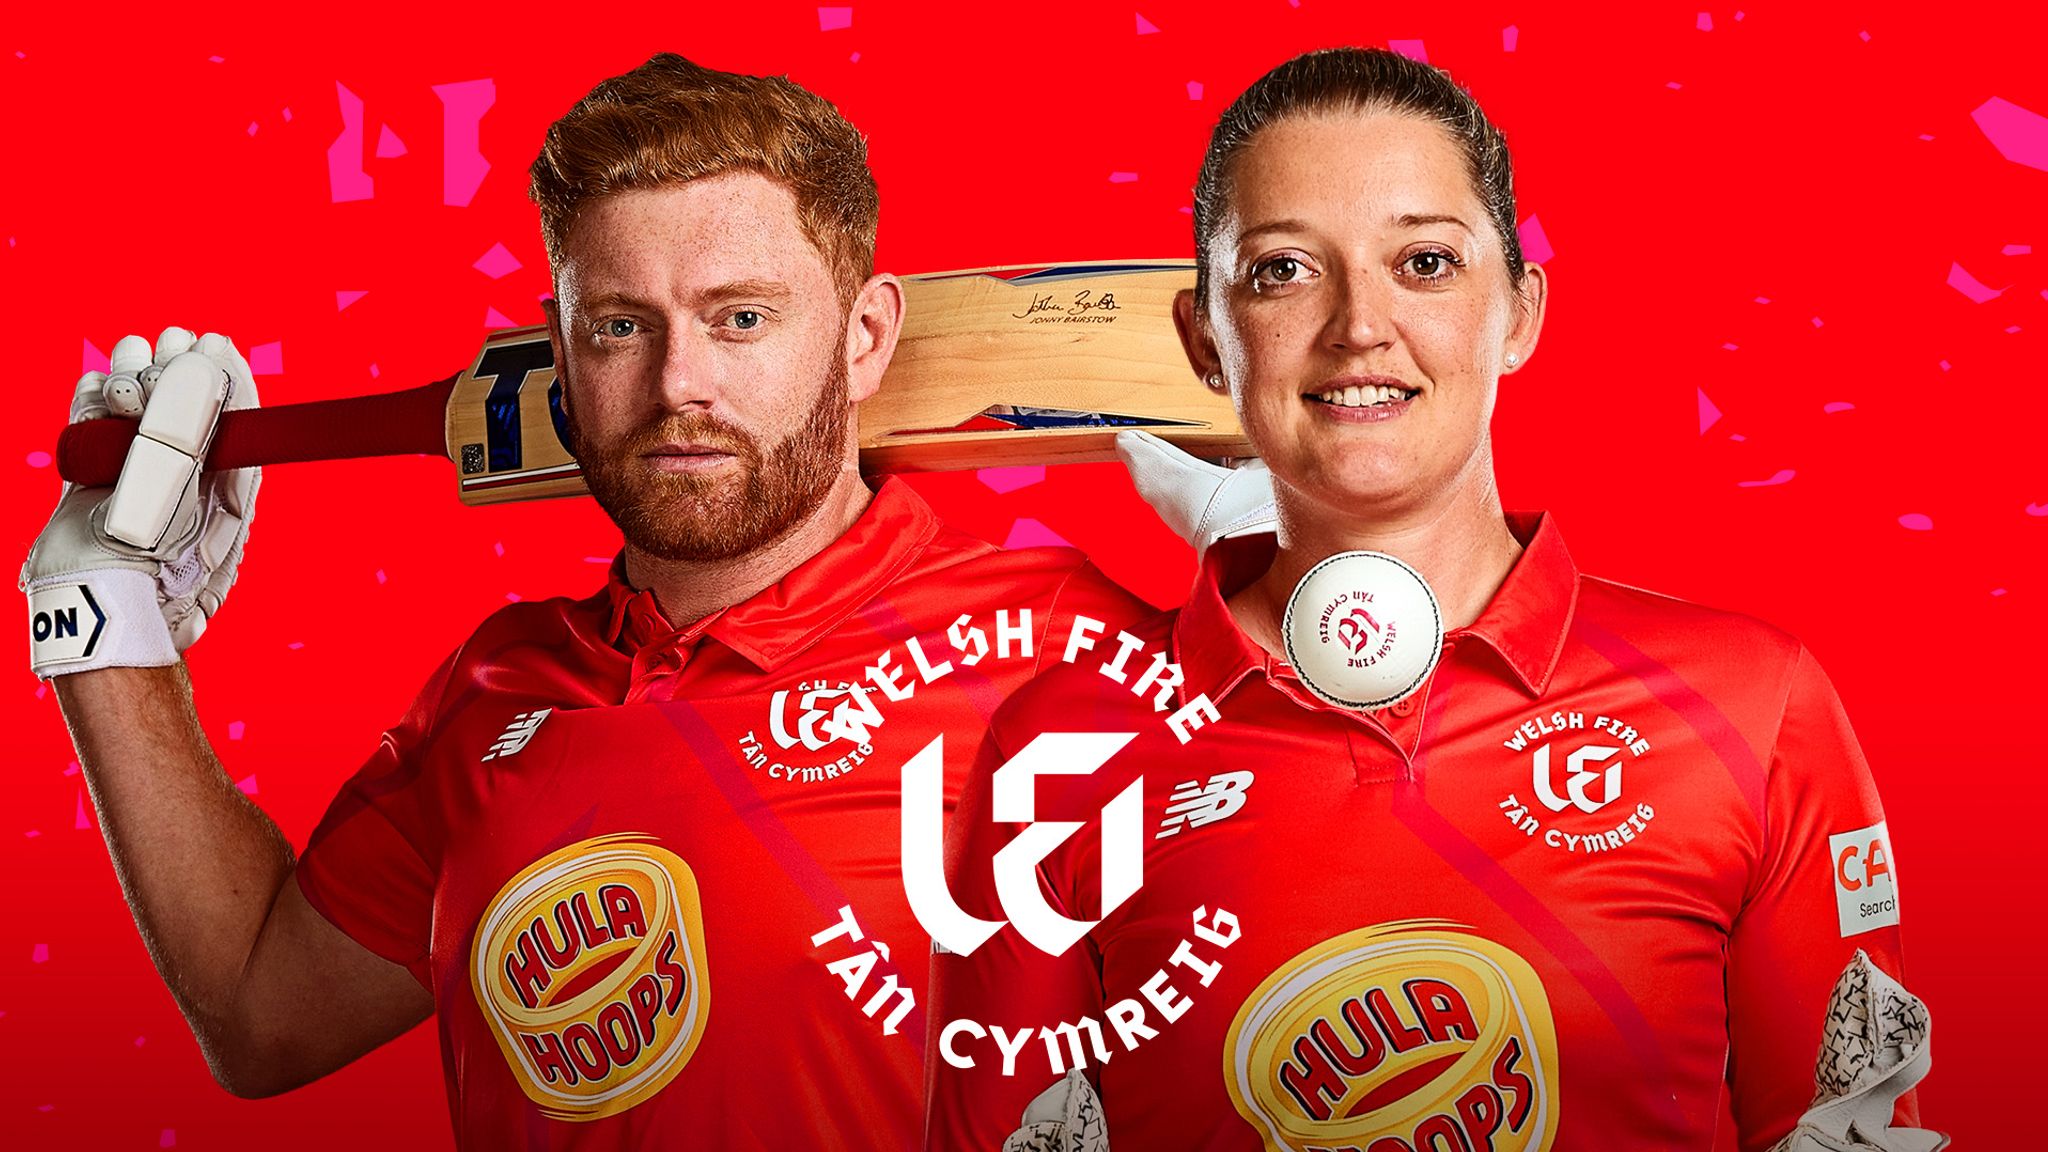 The Hundred team guide: Welsh Fire - all you need to know